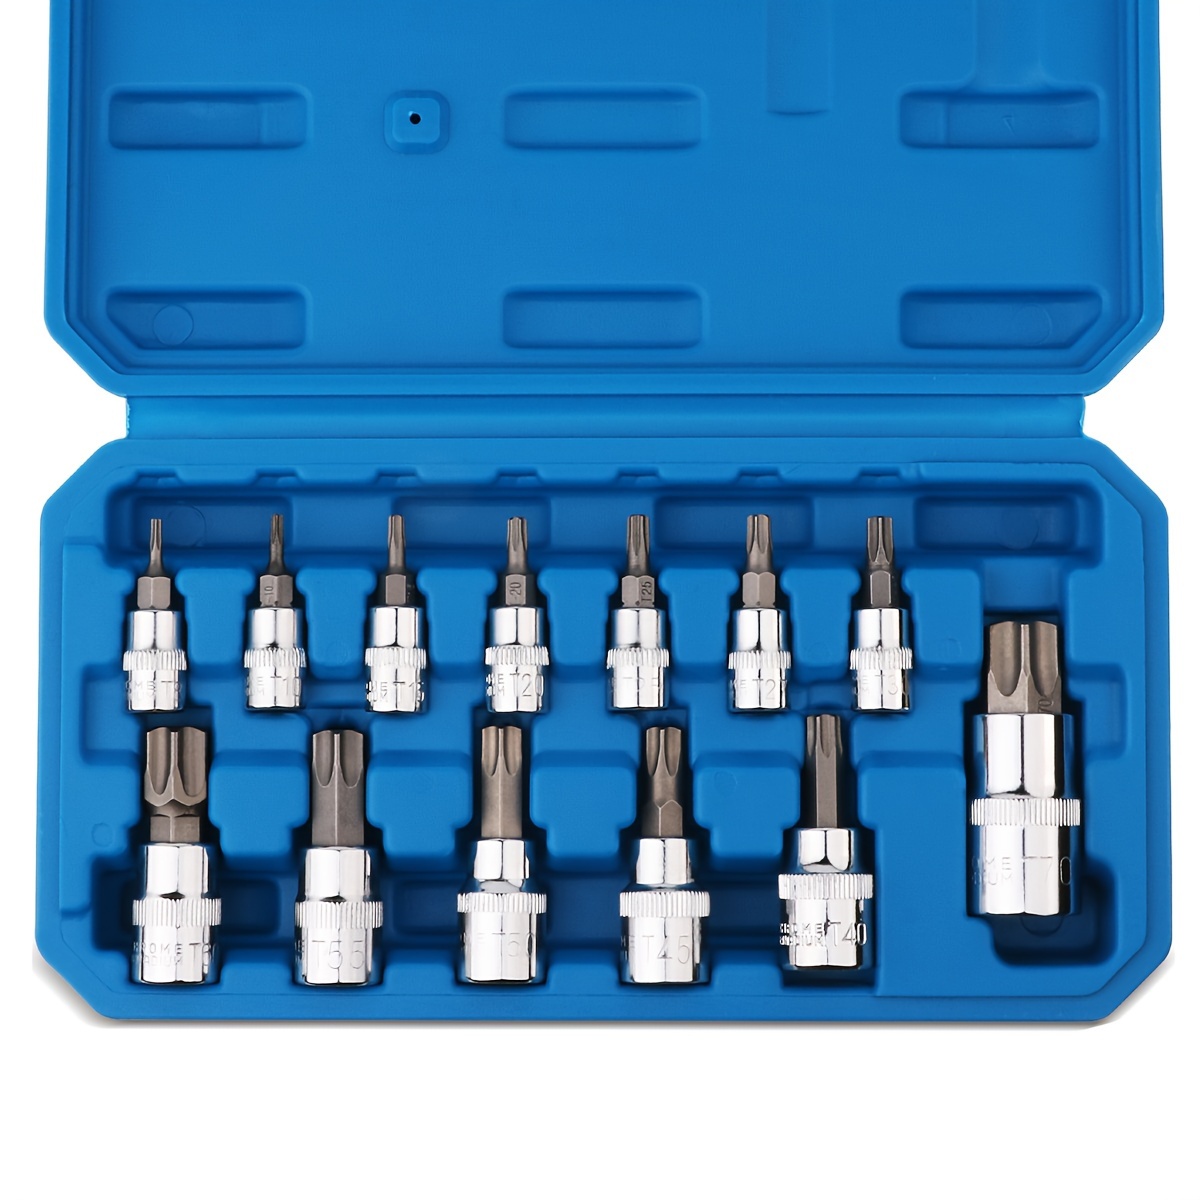 

13pcs Complete Torx And Hex Socket Set With Screwdriver And Bit Attachments - Includes T8-t70 Sizes For Versatile Use